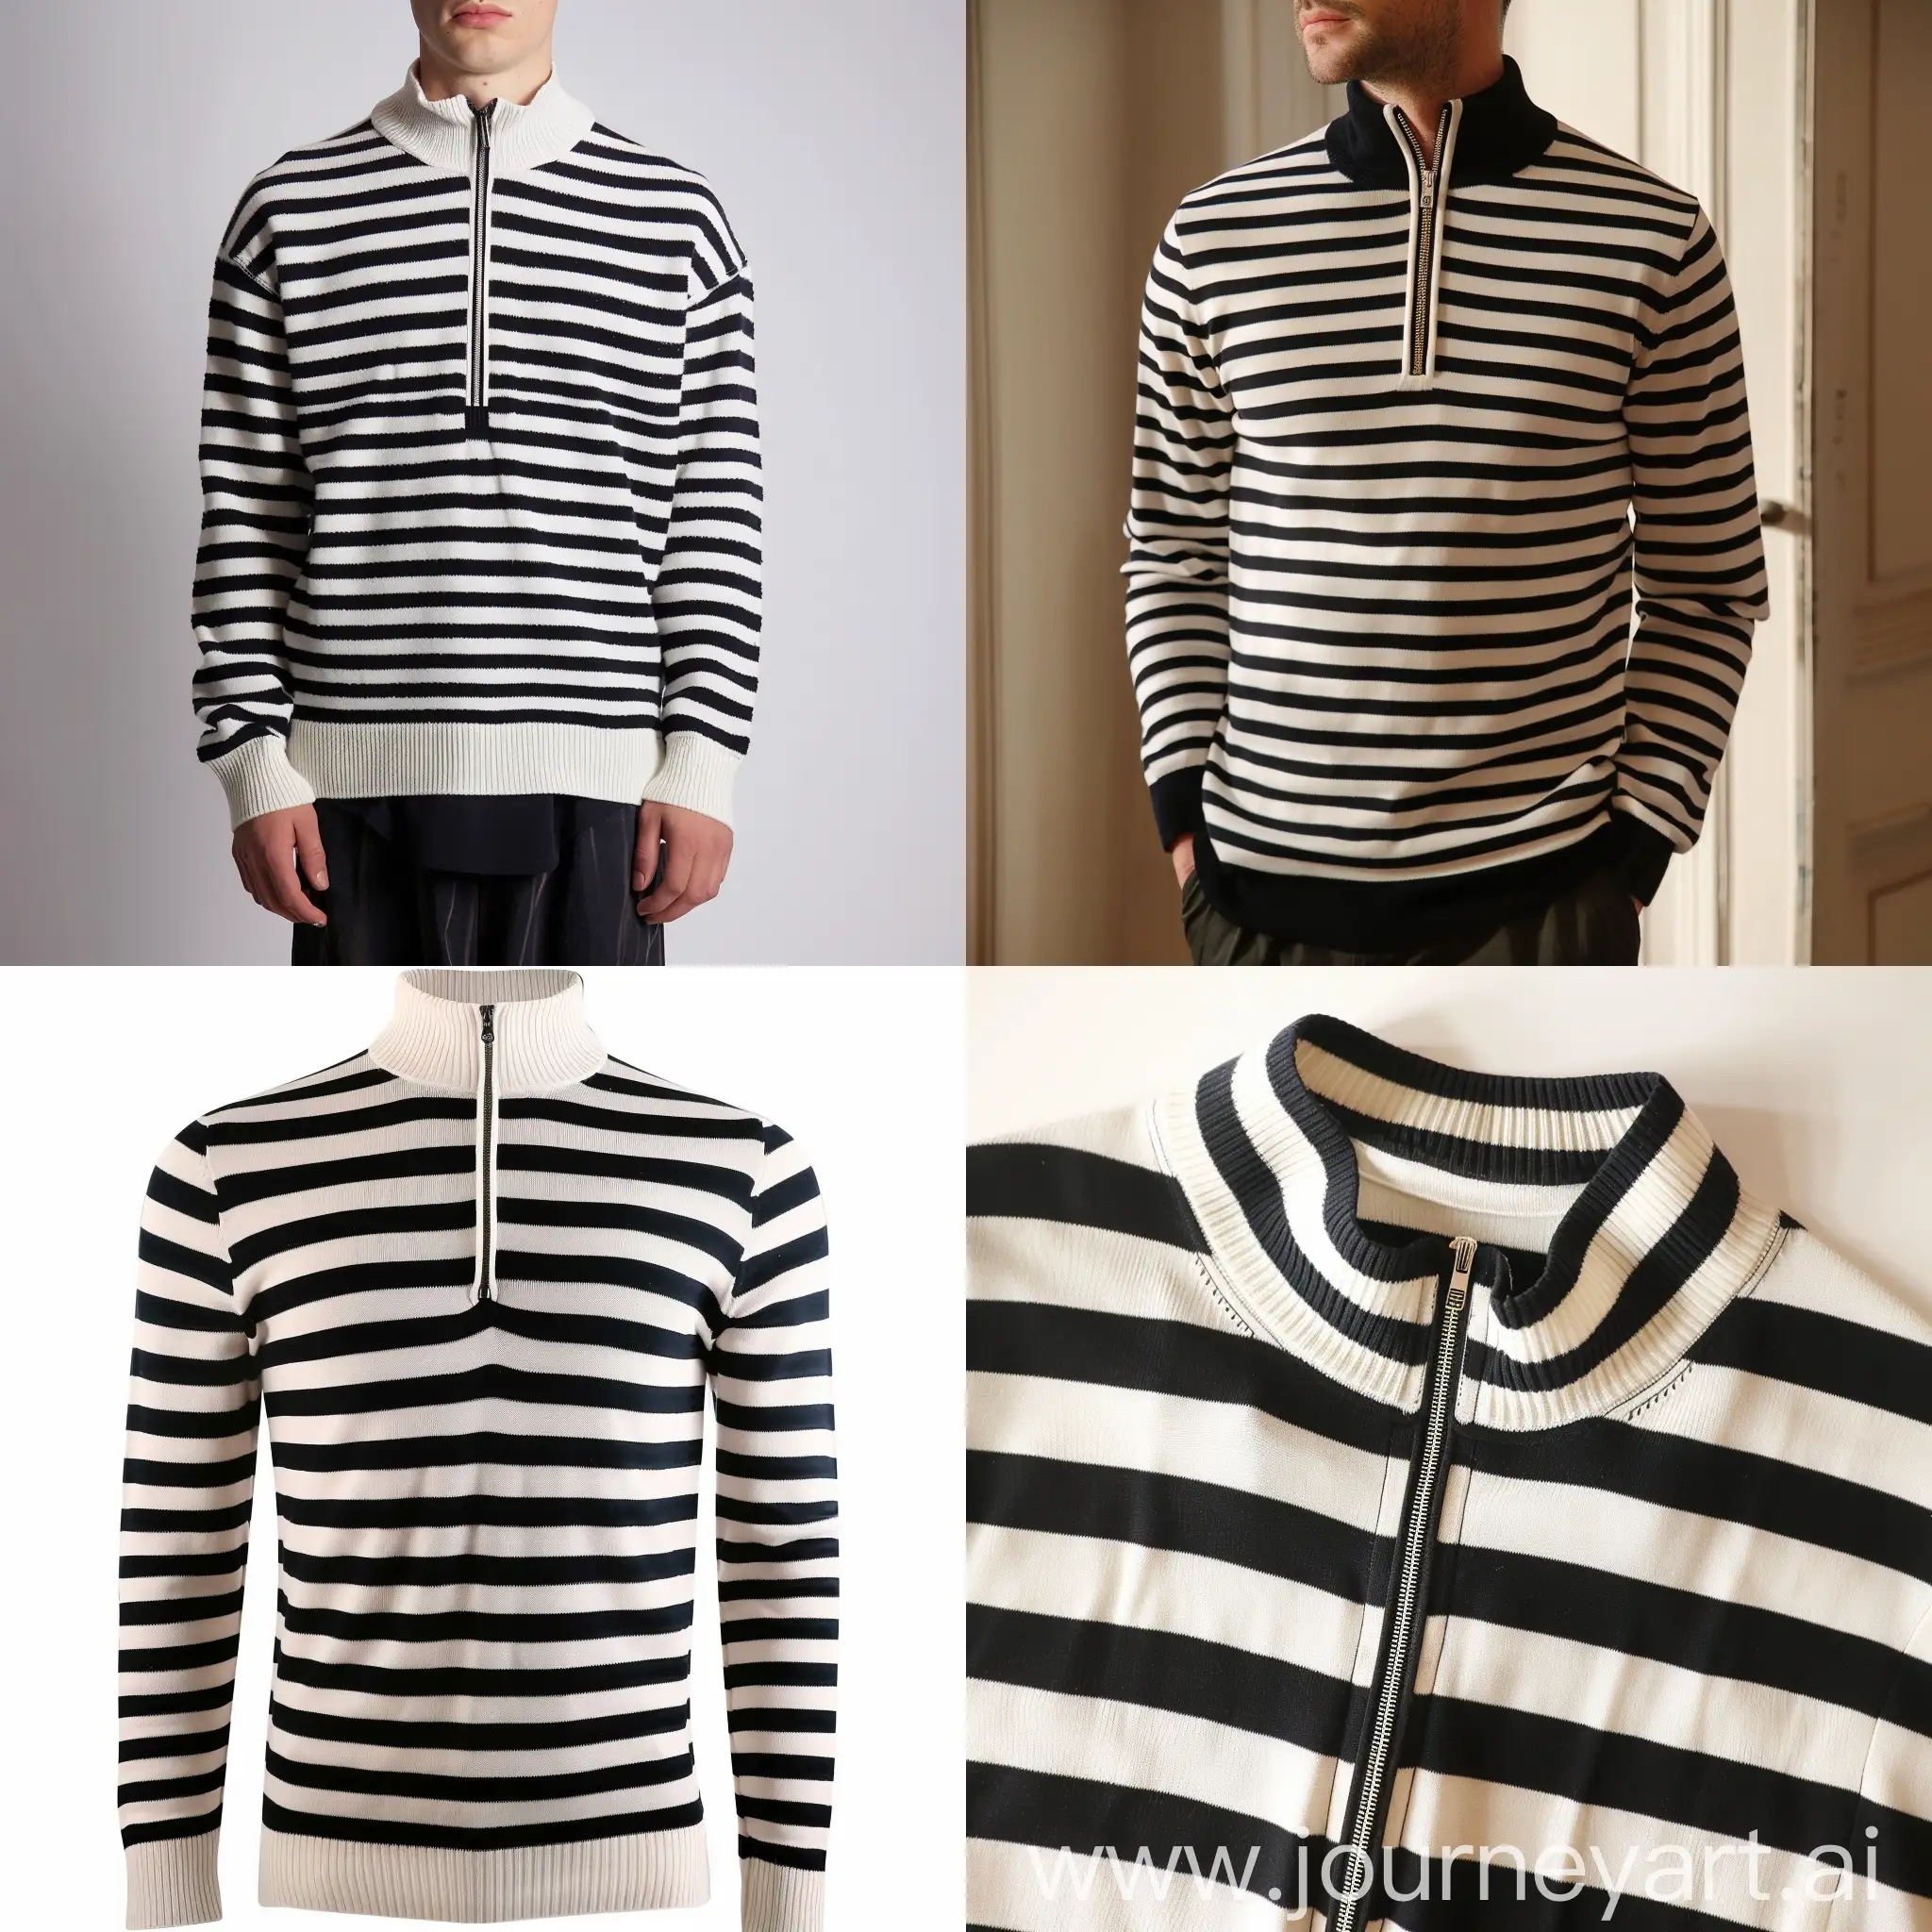 Fashionable-Black-and-White-Striped-Sweater-with-Zip-Neck-Detail